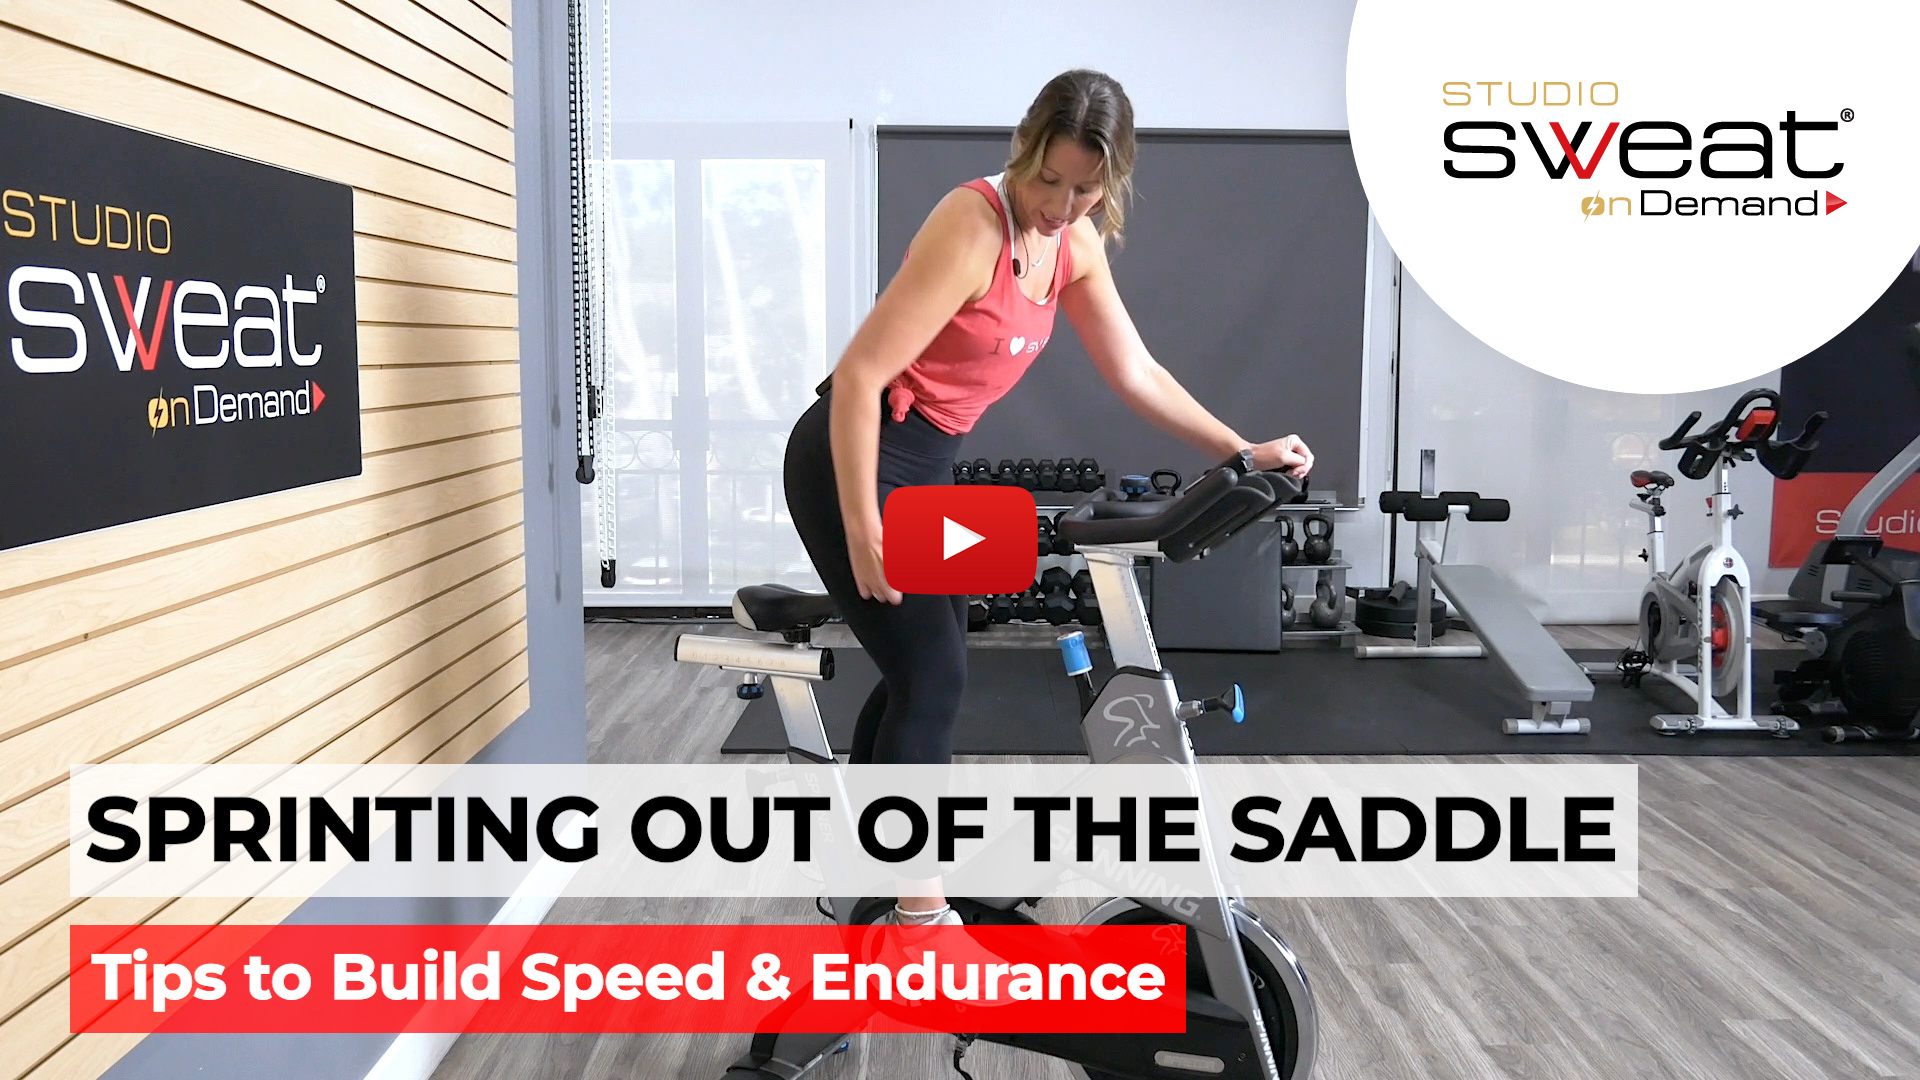 How to build endurance to sprint out of the saddle in Spin class!! YT play button